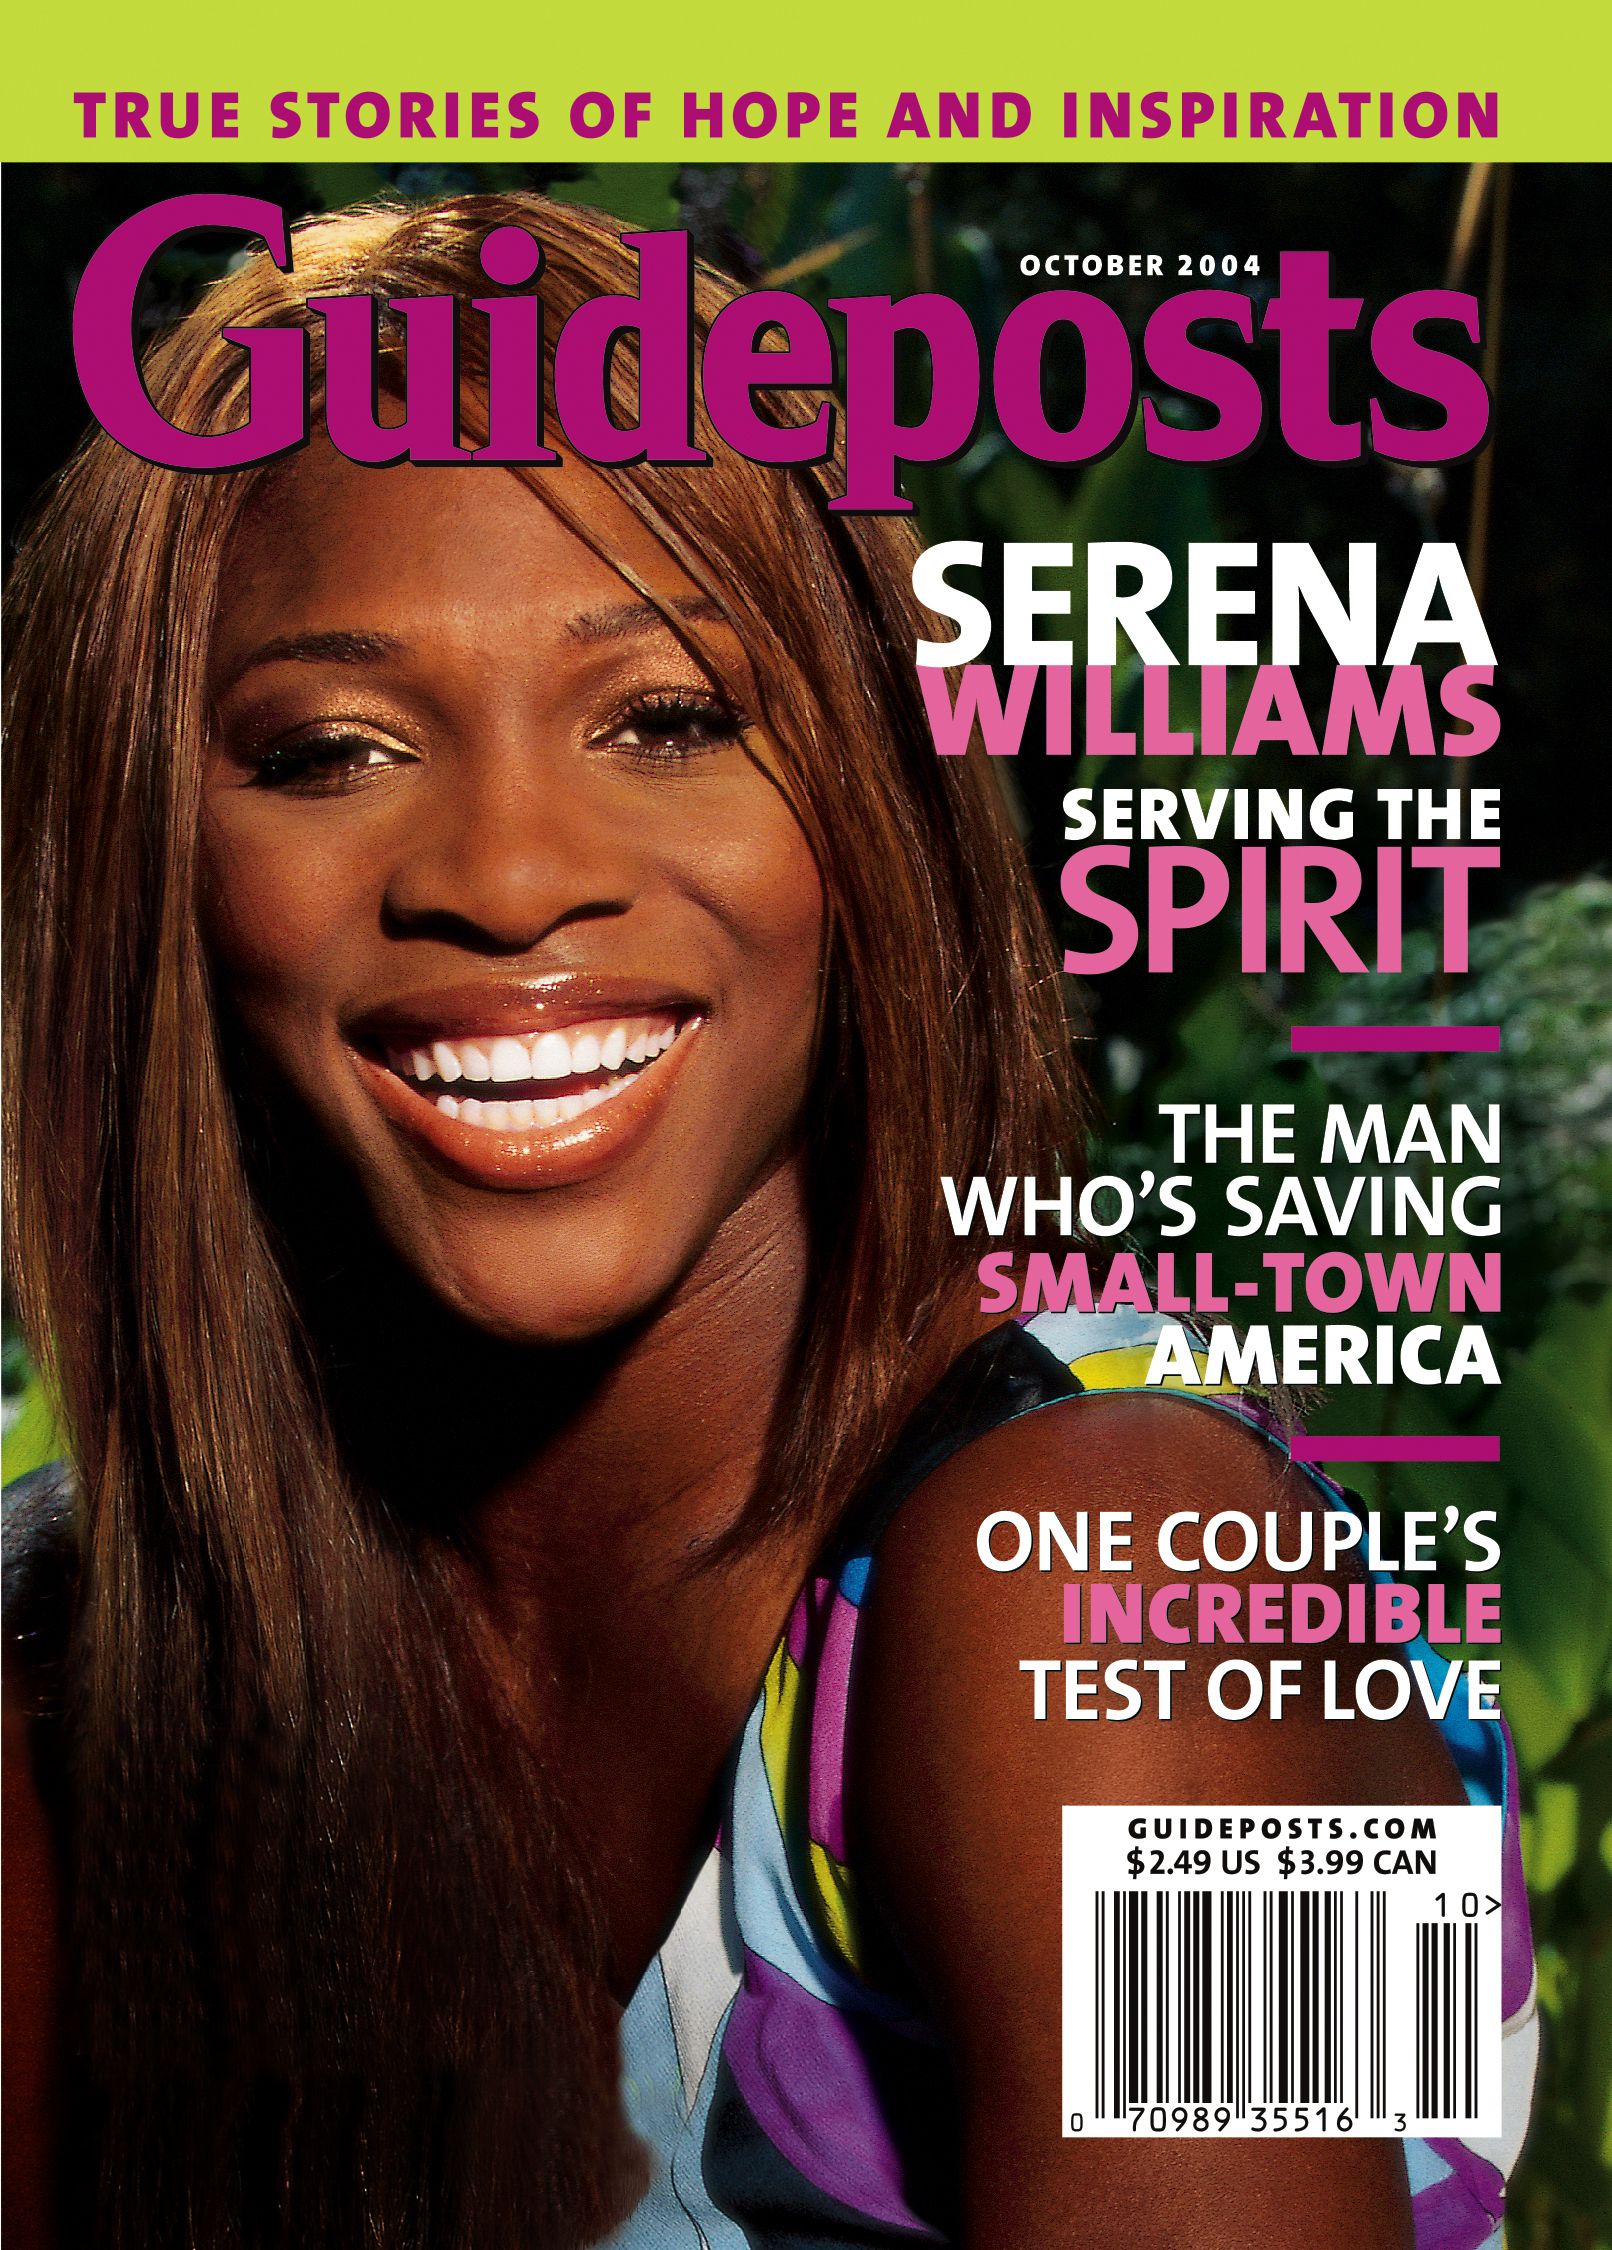 Serena Williams on the cover of Guideposts magazine (Guideposts)